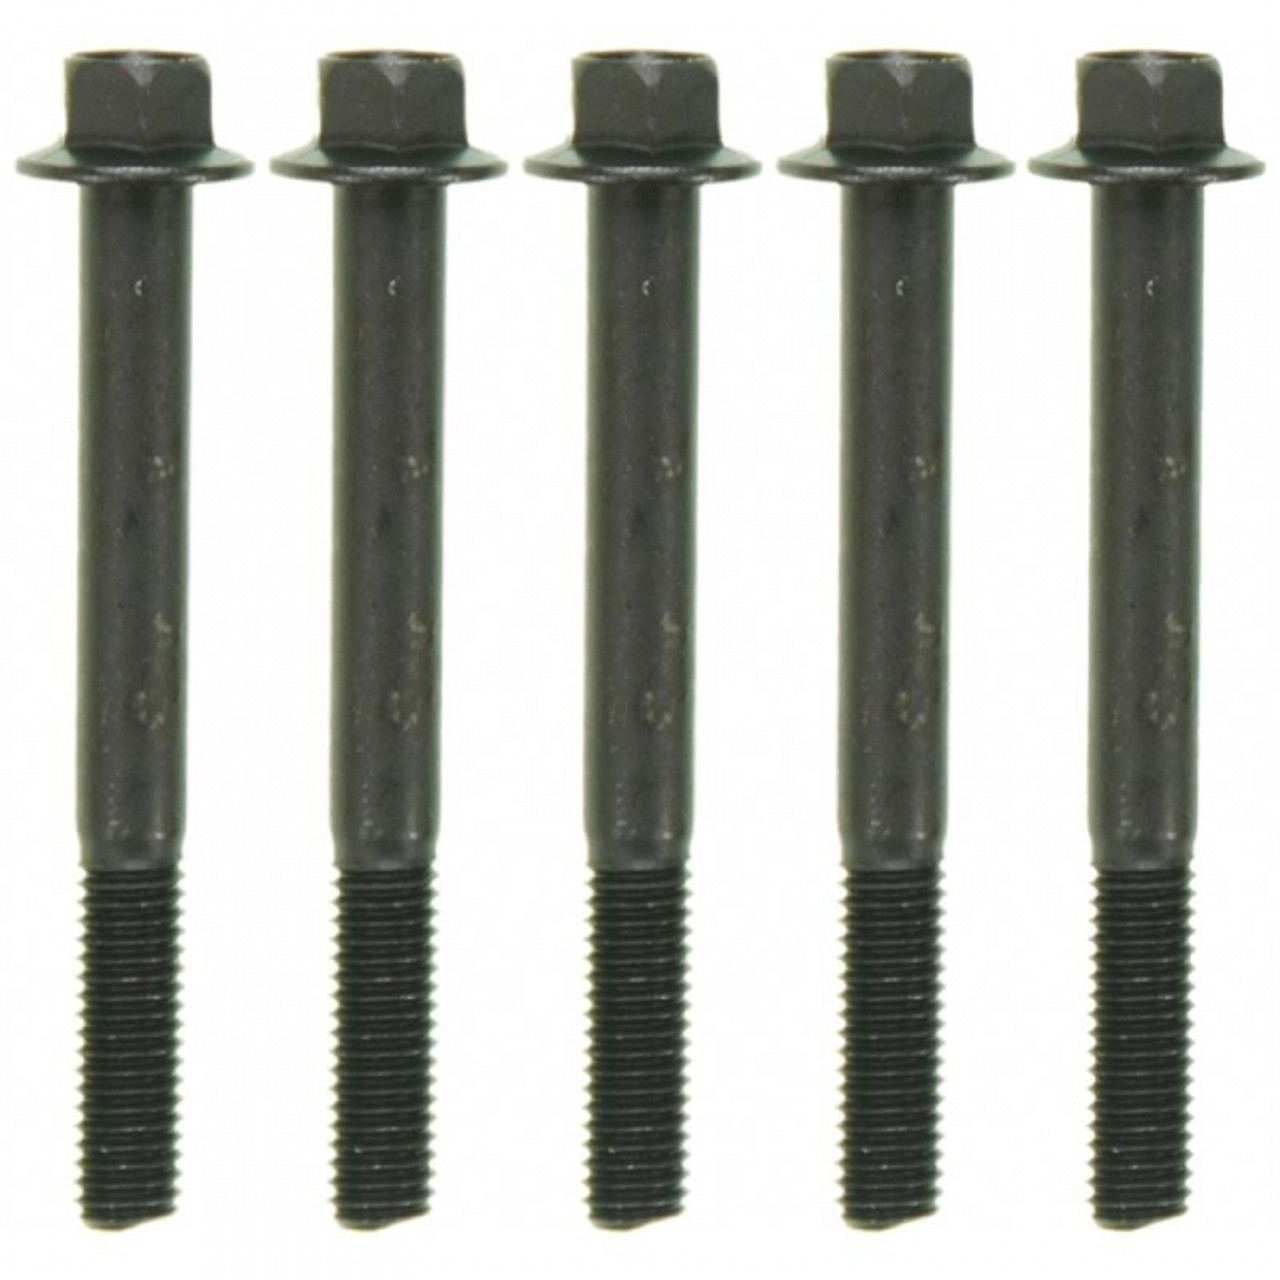 Mahle Cylinder Head "Short Bolts" 2003 to 2010 6.0L/6.4L Powerstroke (MCIGS33519)-Main View